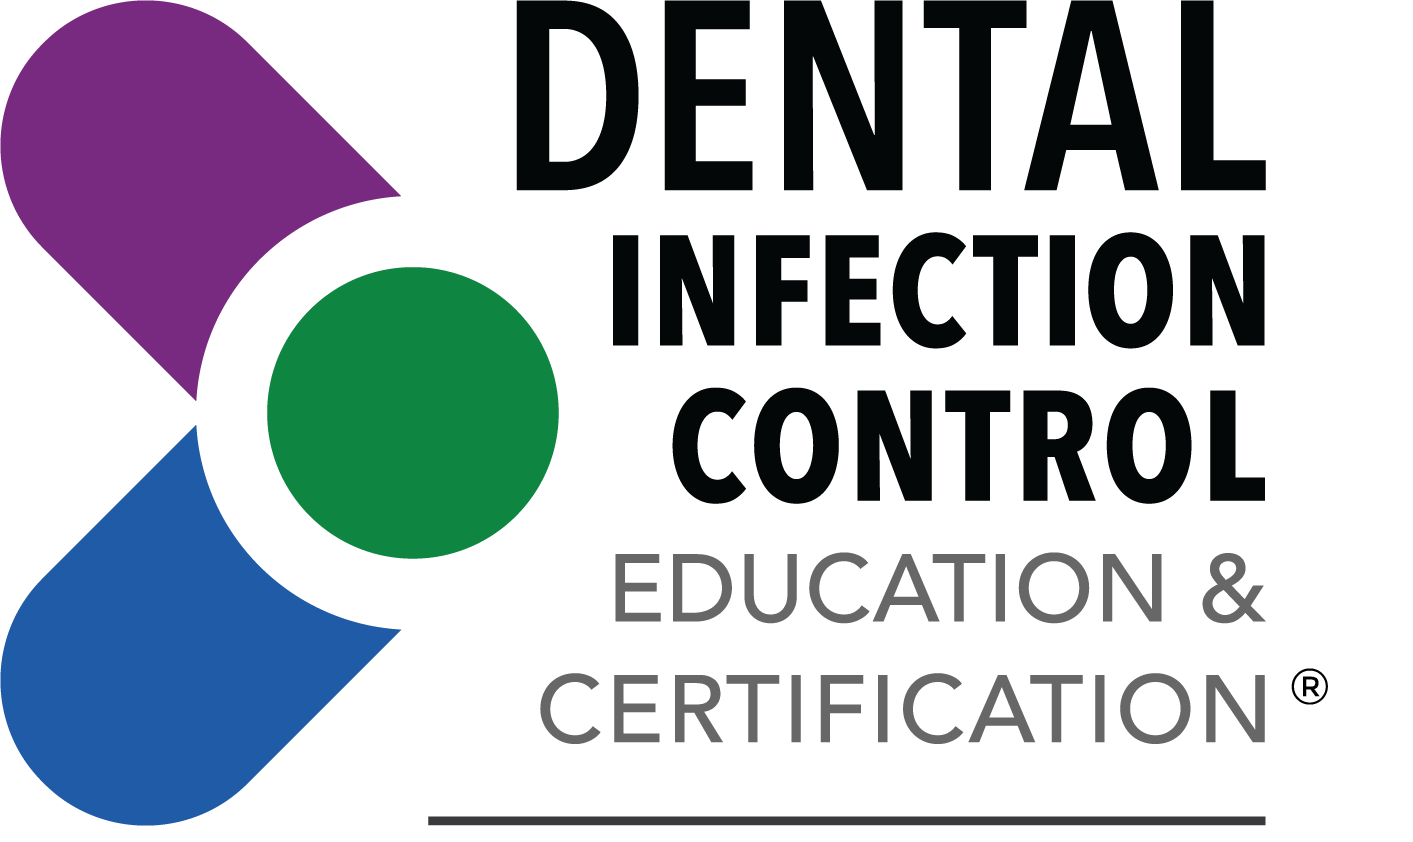 Dental Infection Control Education & Certification